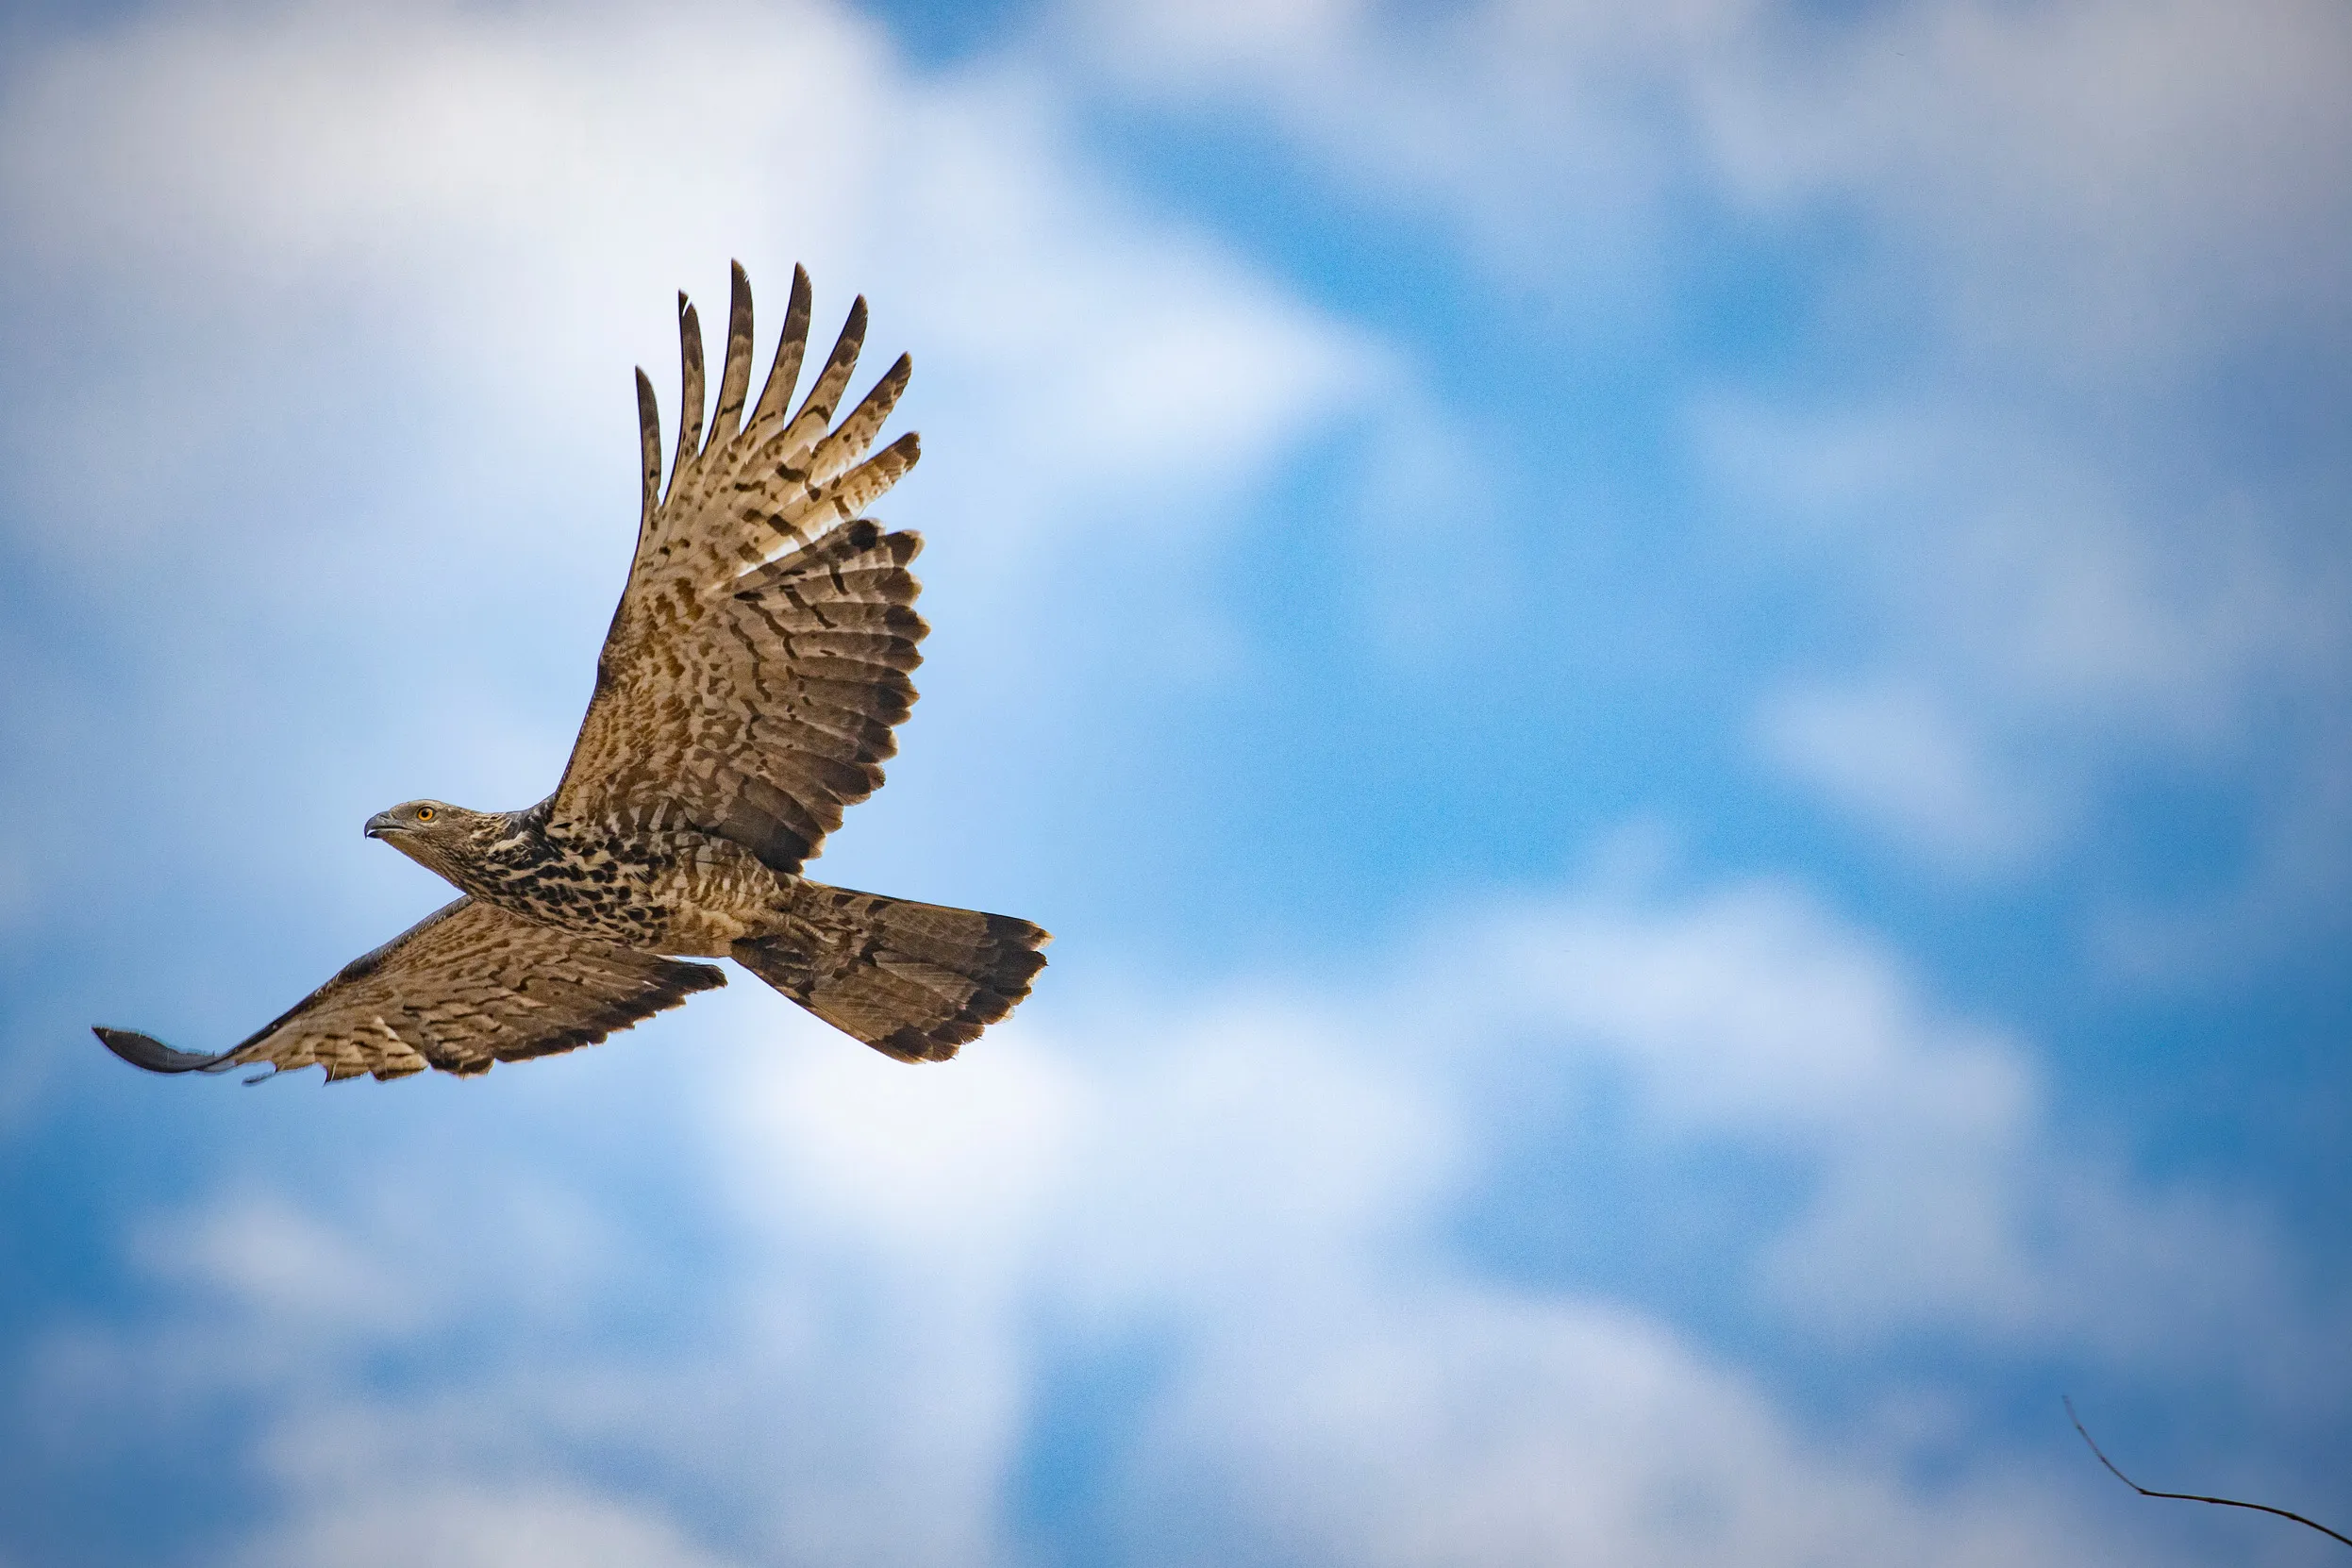 A female Honey Buzzard in flight with blue sky and clouds behind.